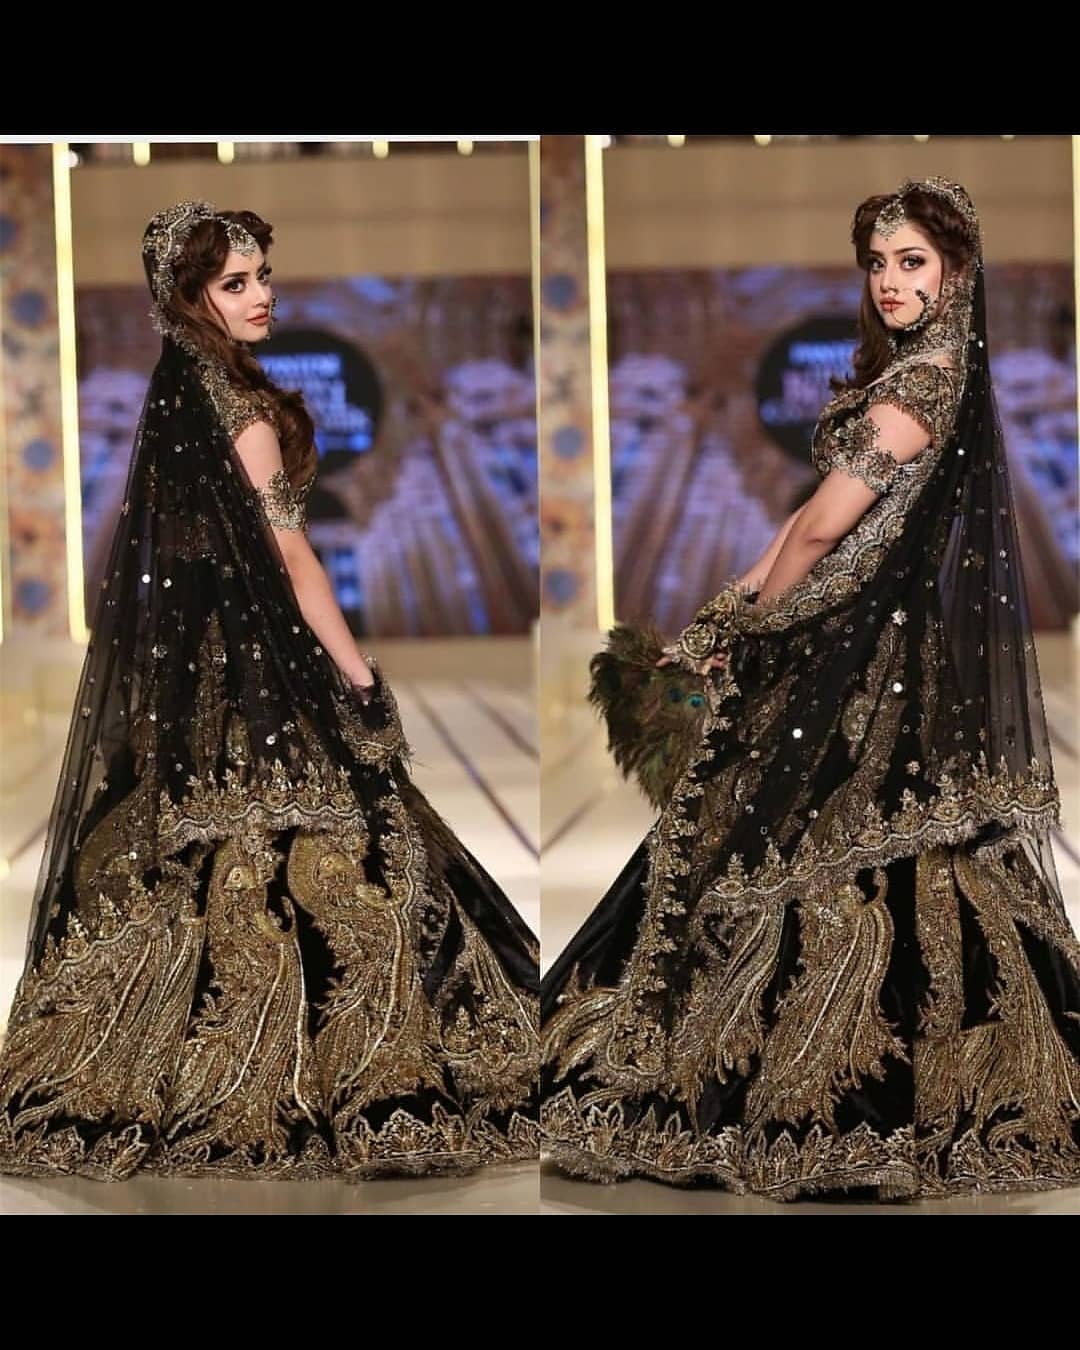 Alizeh Shah Steals The Show at Bridal Couture Week 2021 - Pictures!